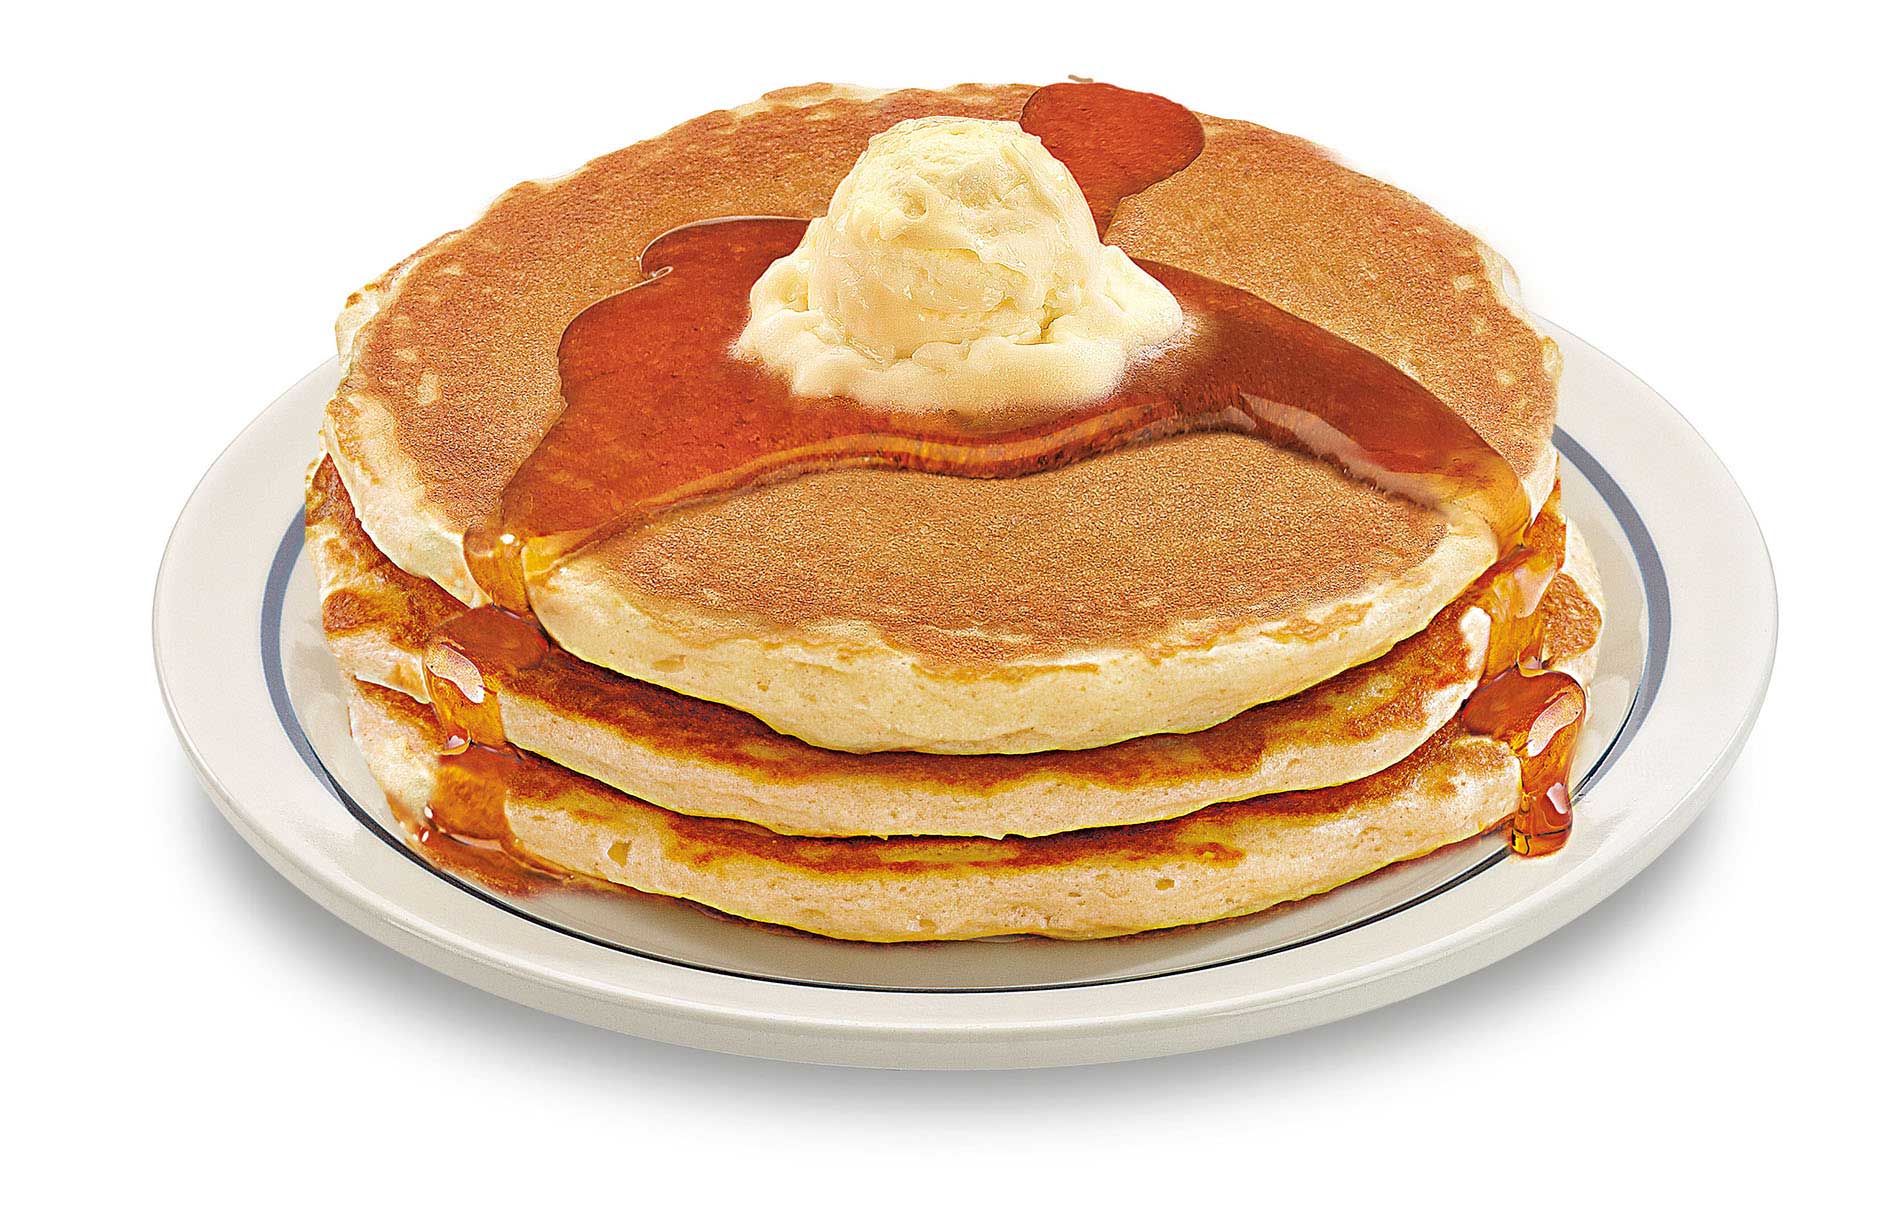 With nearly six decades of service and more than 700 million pancakes served, IHOP world-famous Original Buttermilk Pancakes continue to be one of the most popular menu items and are available for 58 cents on July 12.